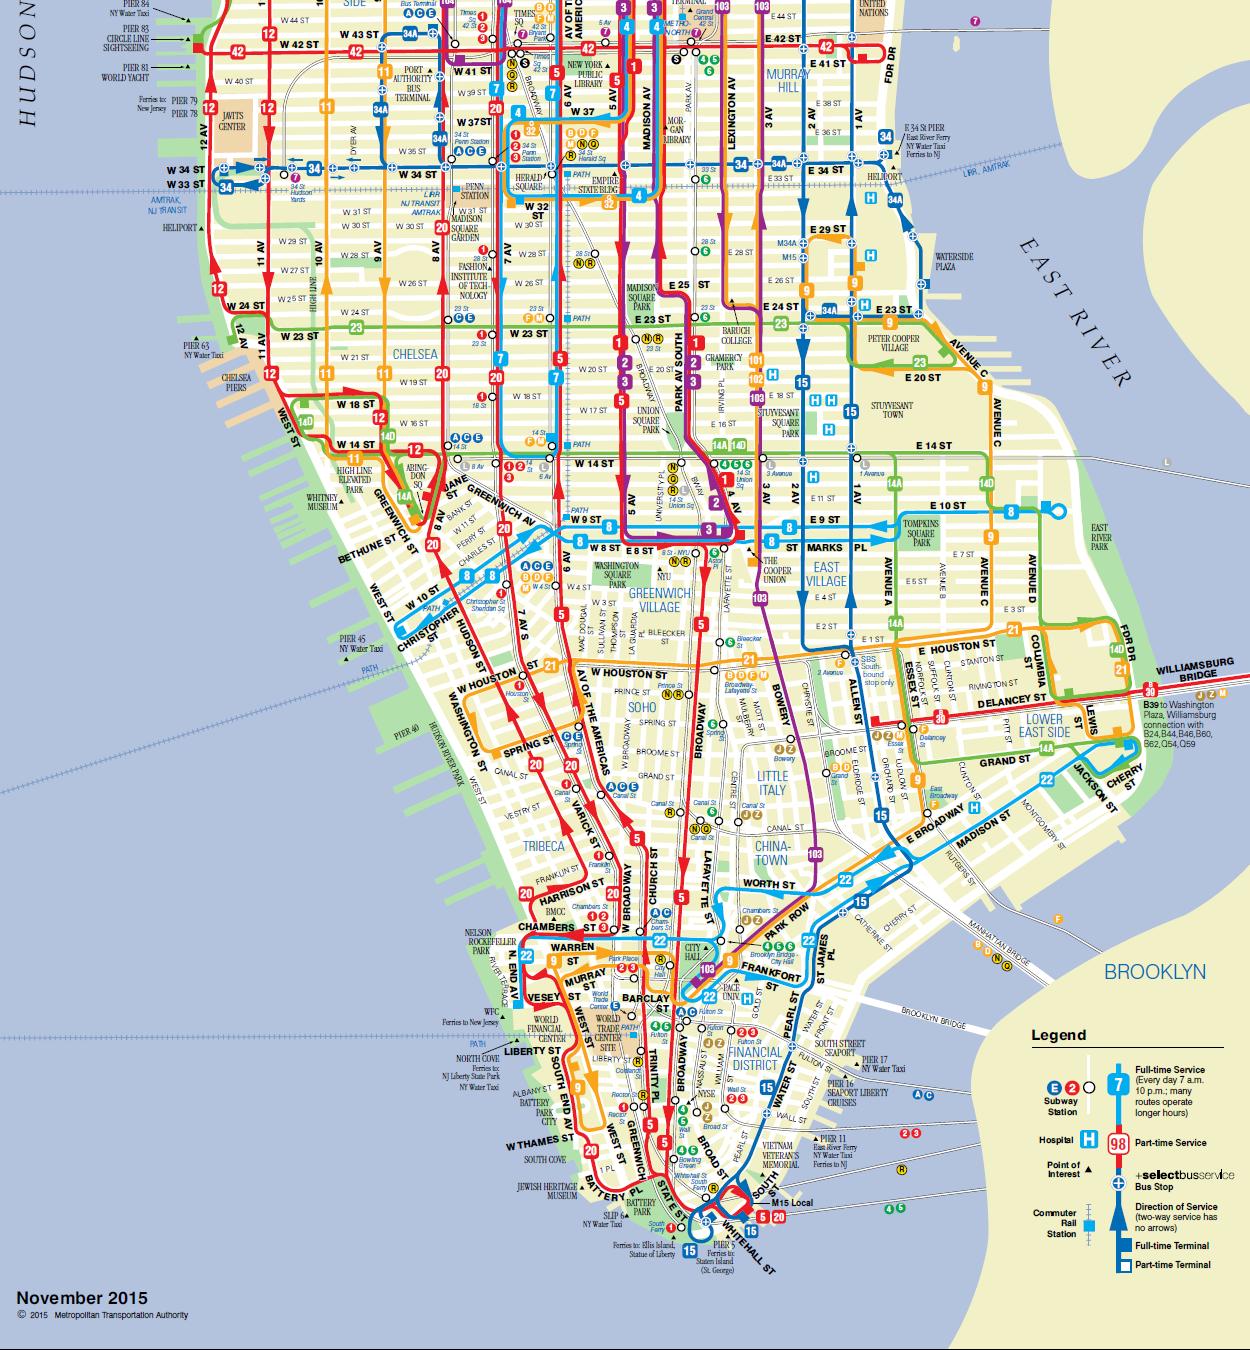 mta nyc bus map - mta bus schedule map (new york - usa)